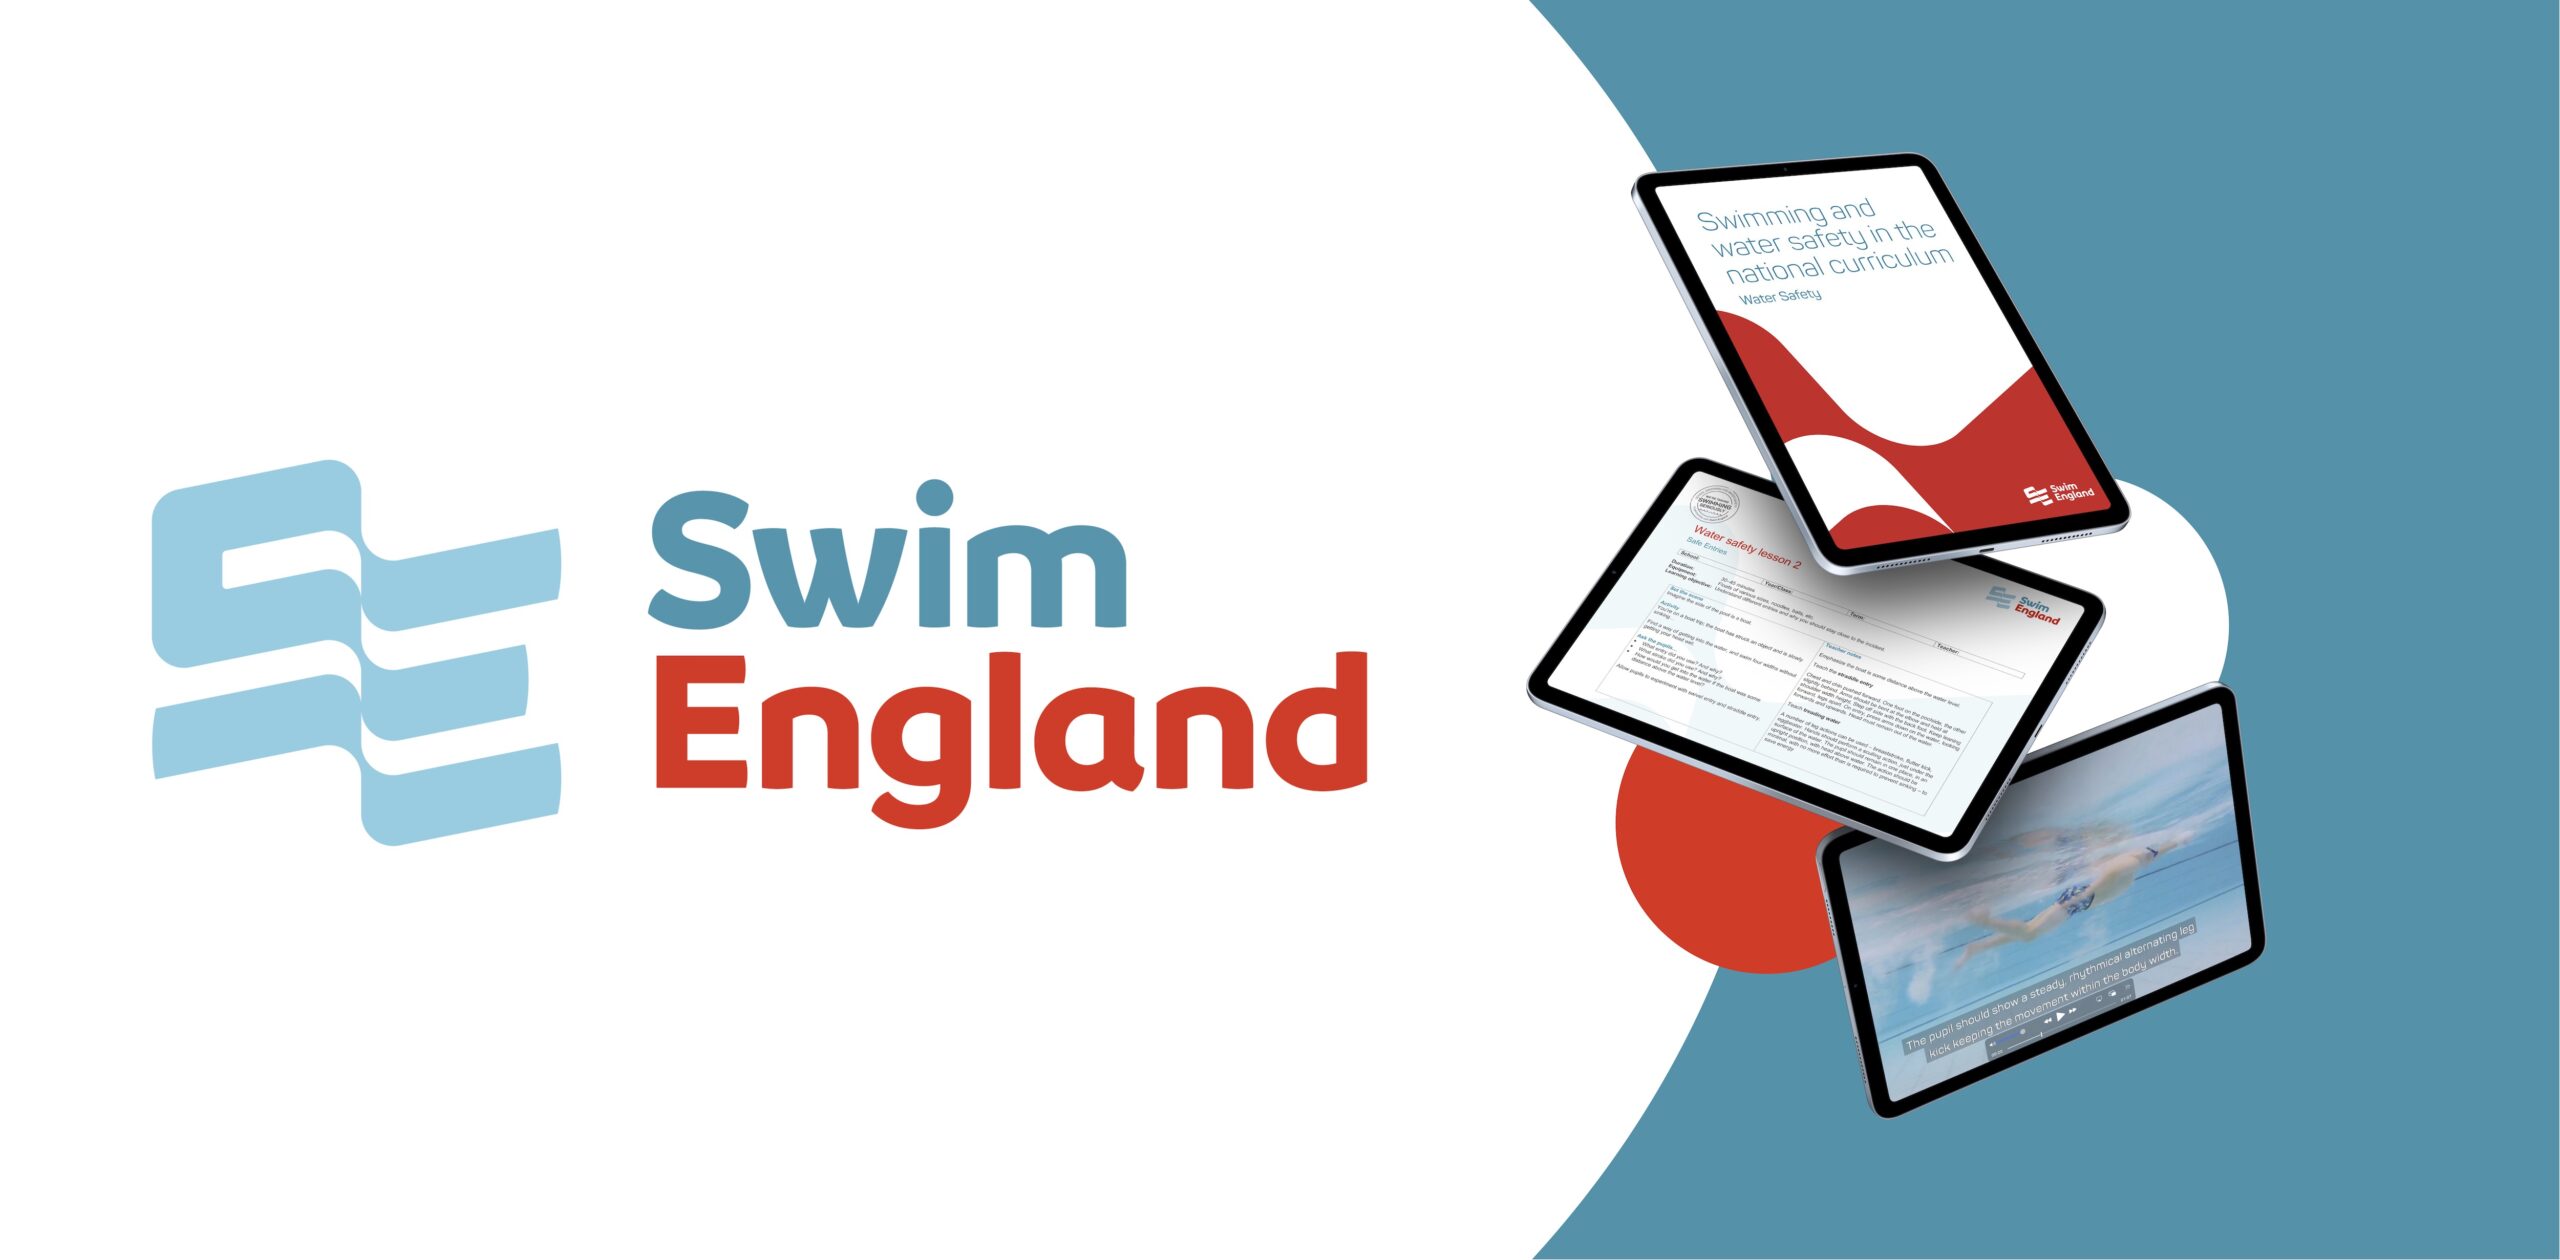 Swim England | Swimming and Water Safety Resources